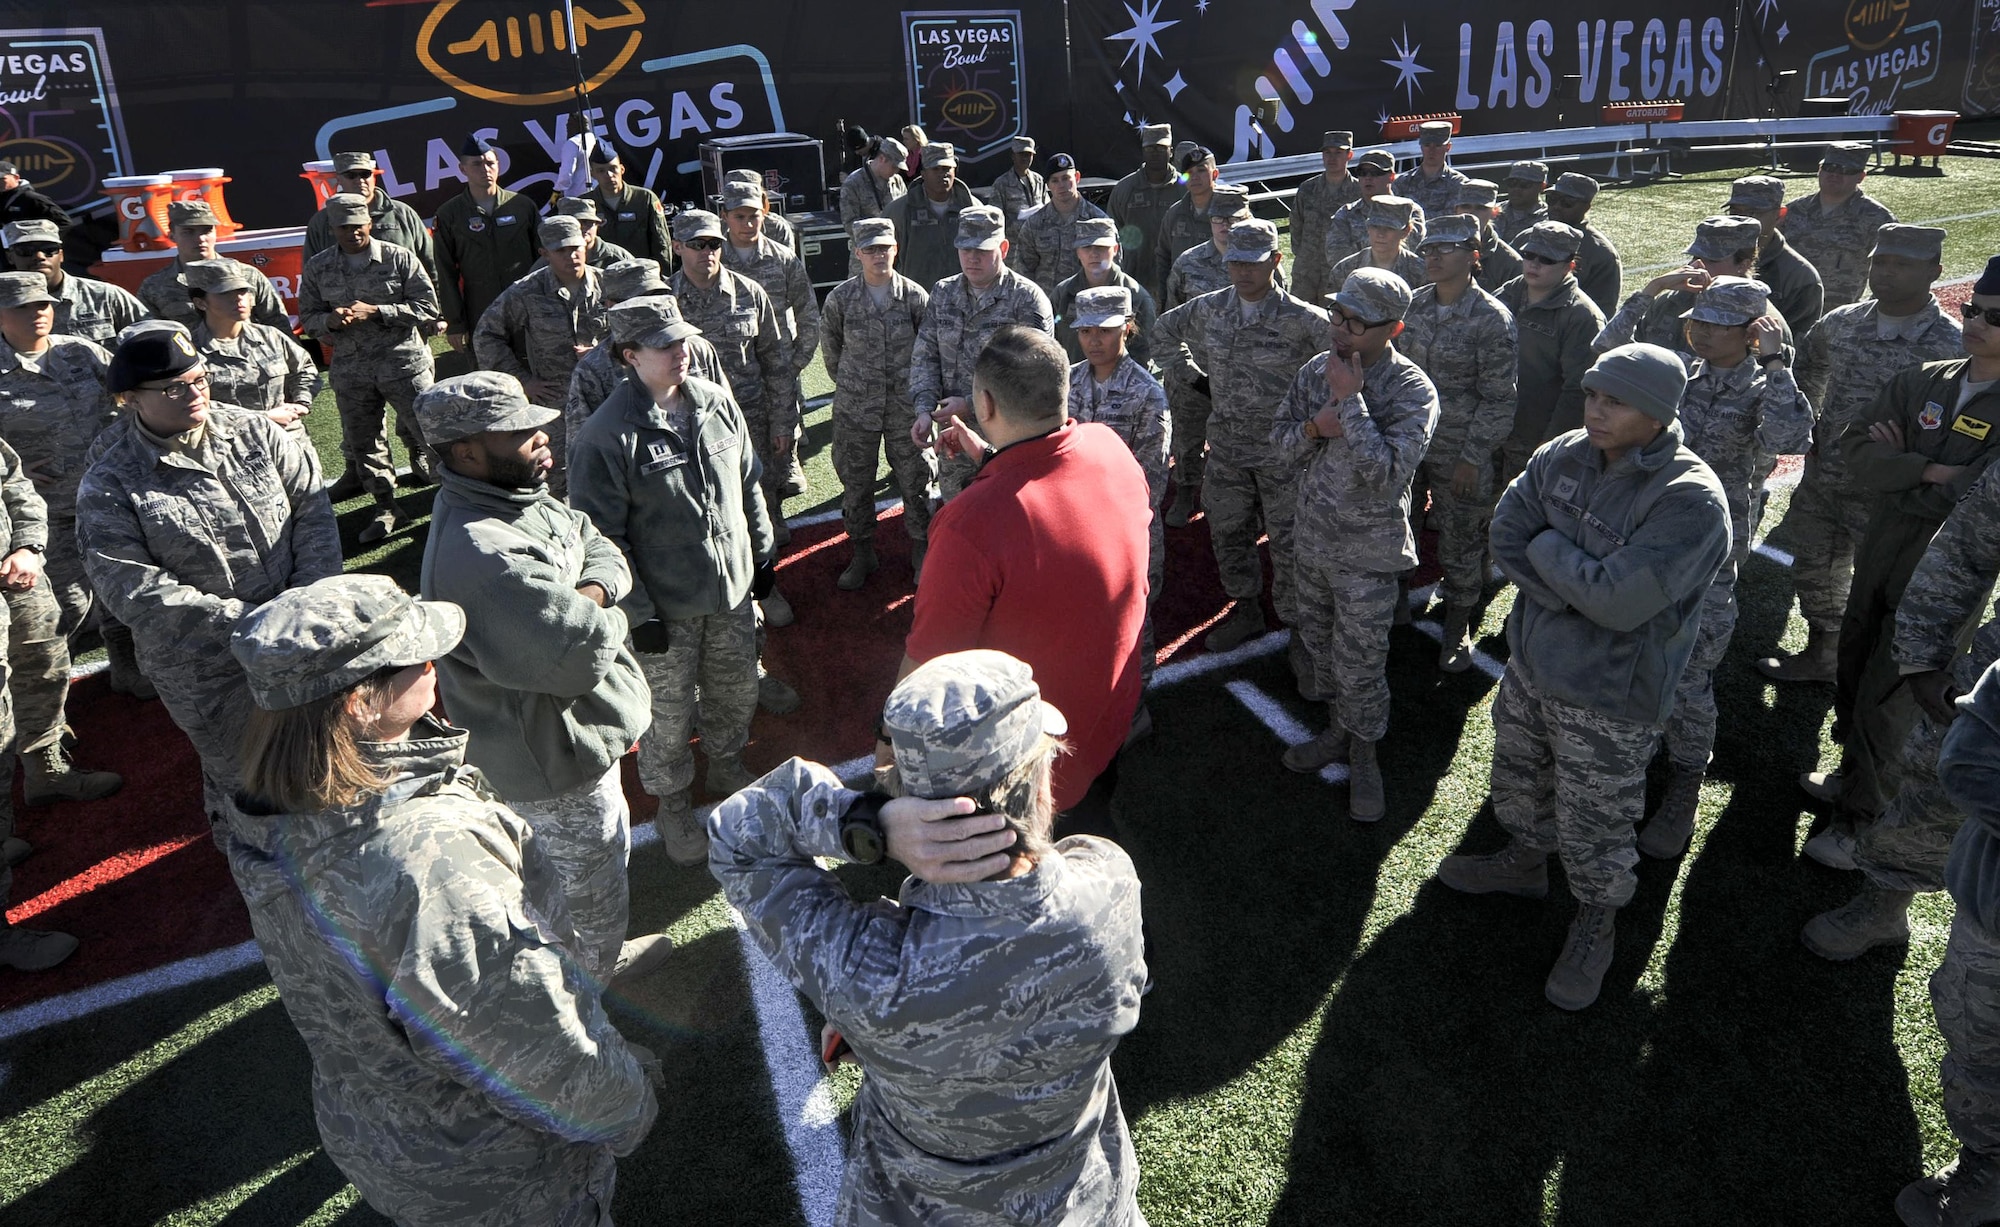 Airmen from Nellis and Creech Air Force Bases take direction on how to unfold the large American flag at Sam Boyd Stadium before the Las Vegas Bowl, Dec. 17, 2016. Mountain West champion San Diego State defeated Houston in the 25th Las Vegas Bowl, 34-10. (U.S. Air Force photo by Airman 1st Class Kevin Tanenbaum/Released)